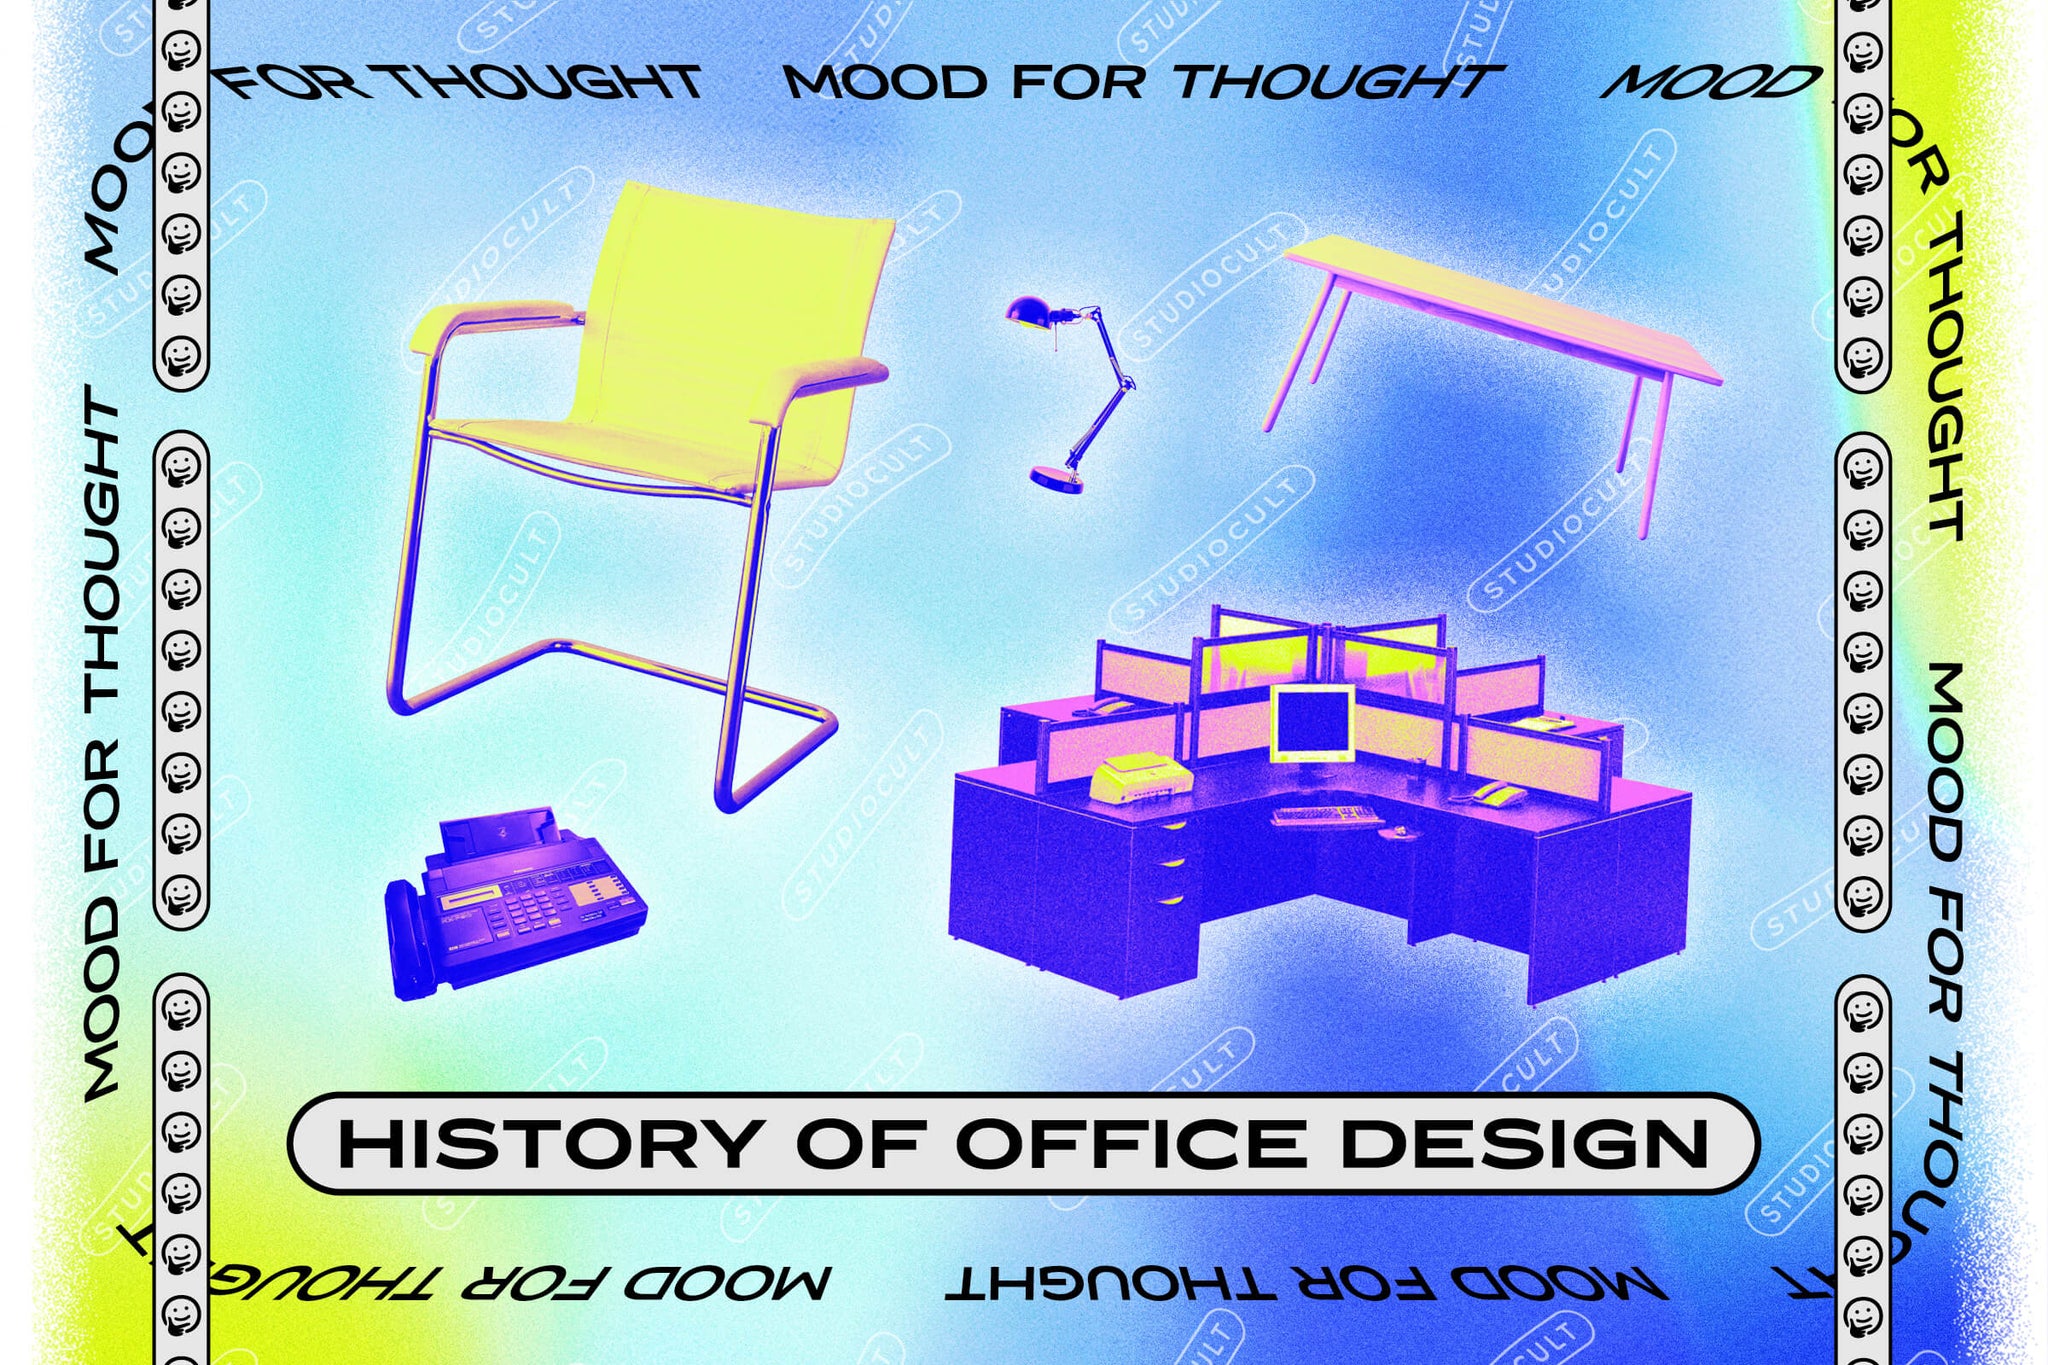 The History of Office Design